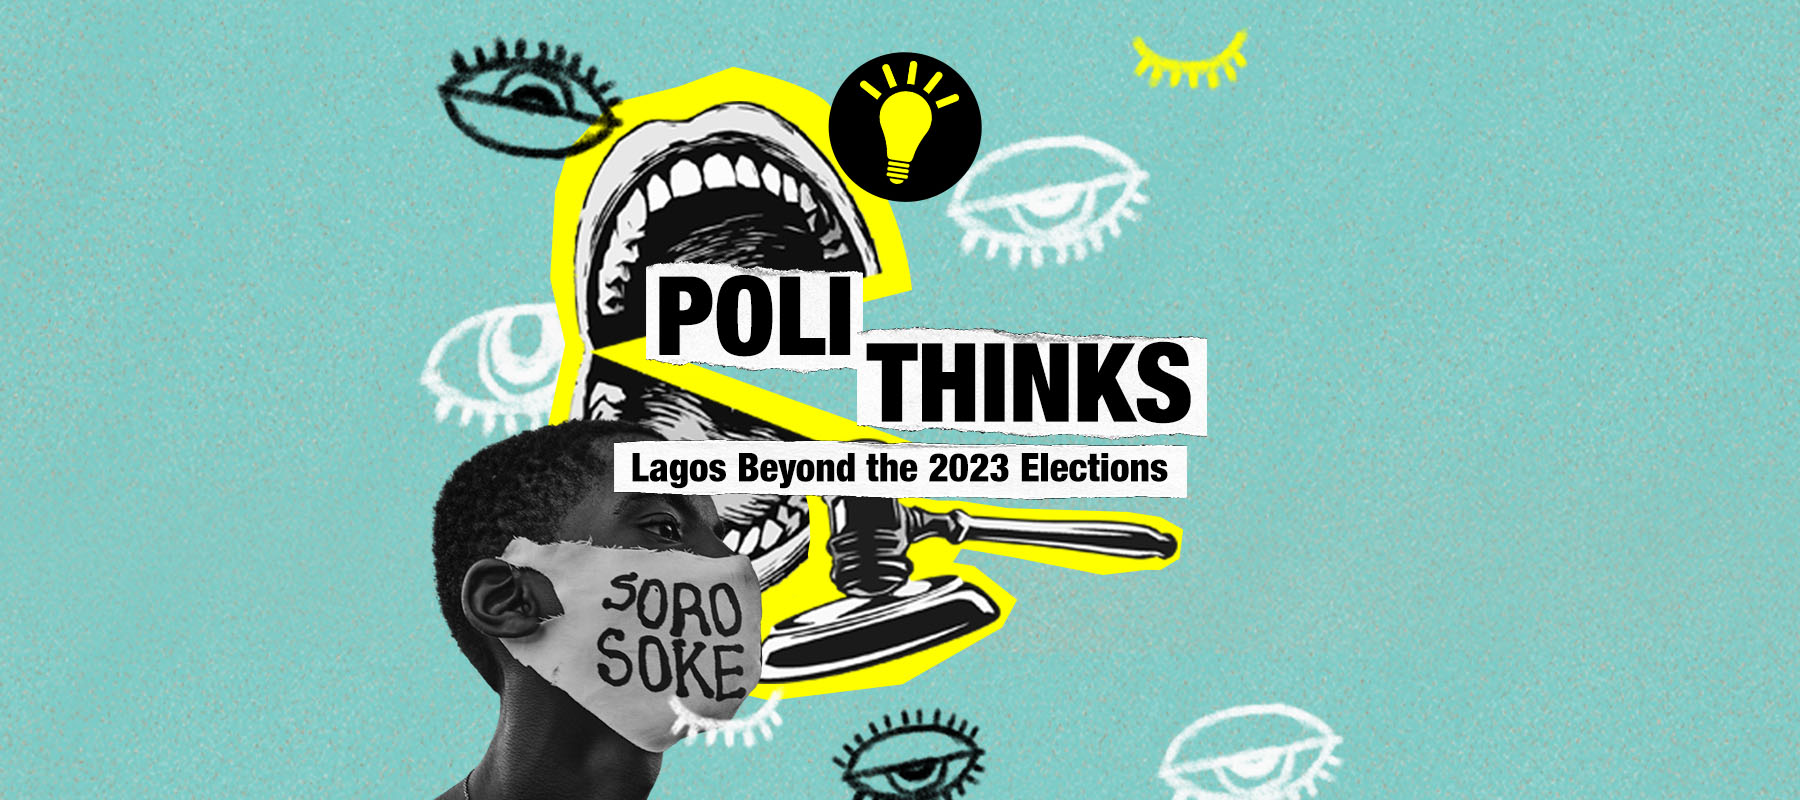 Polithinks: Lagos Beyond the 2023 Elections